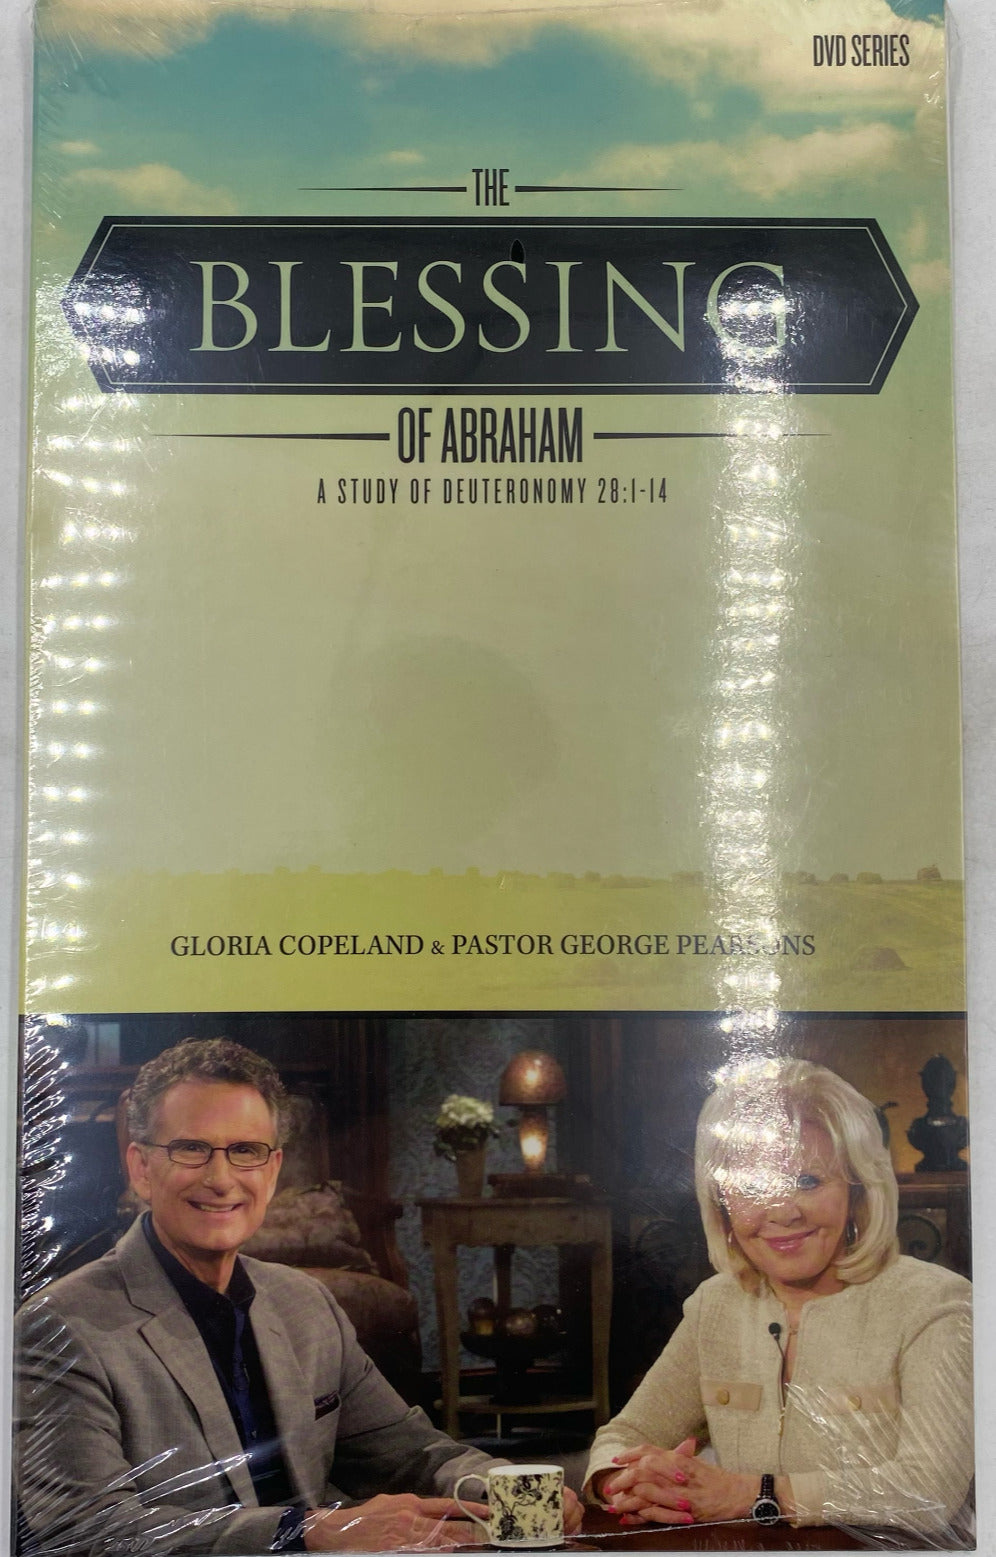 The Blessing of Abraham - A Study of Deuteronomy 28:1-14 DVD *NEW